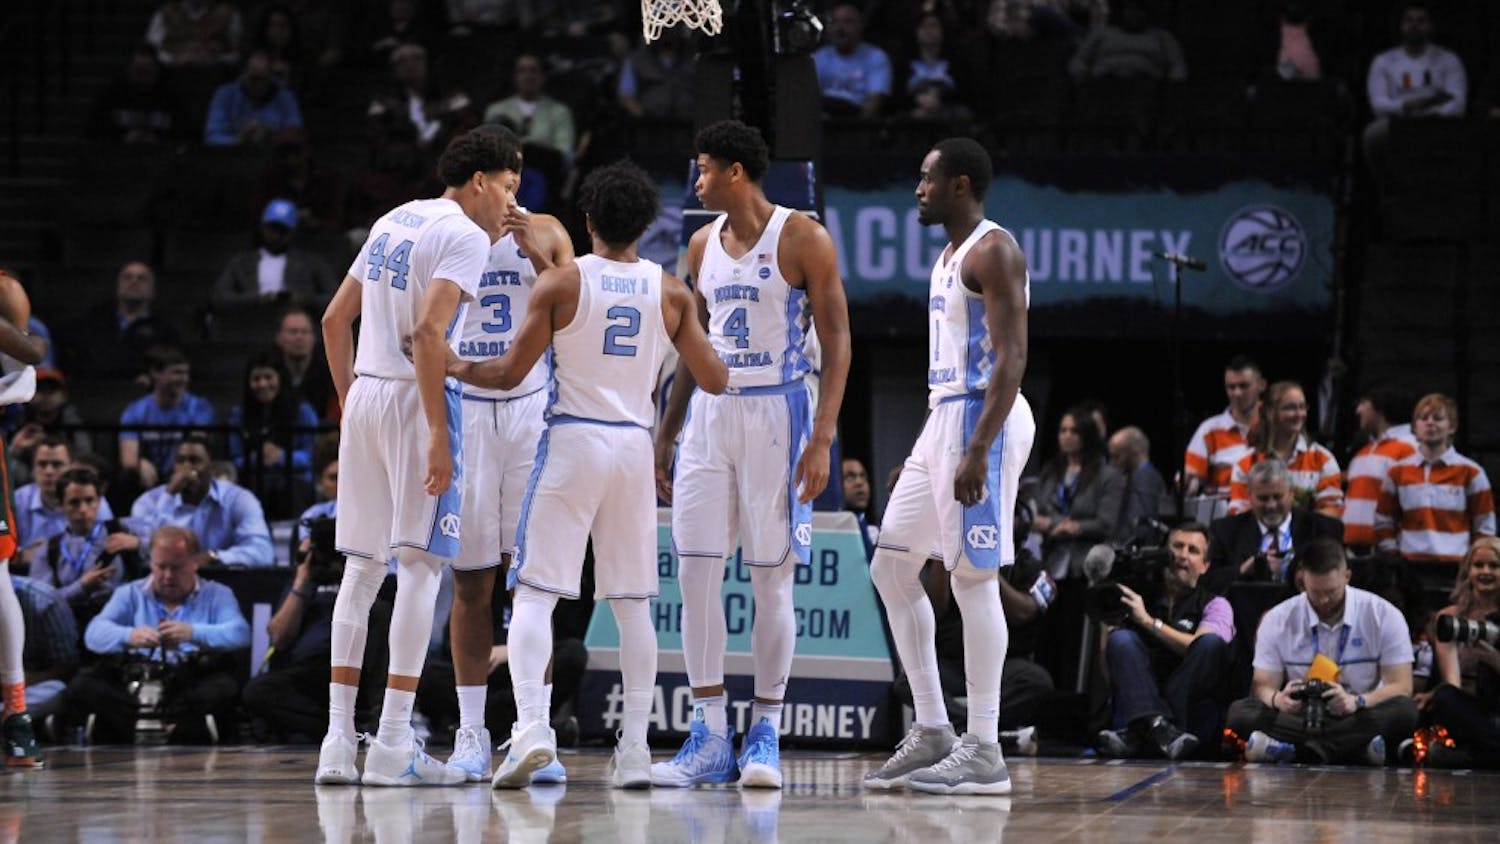 The Tar Heels huddle between play during the game against Miami on Thursday. UNC is the No. 1 seed in the South region for the NCAA tournament.&nbsp;